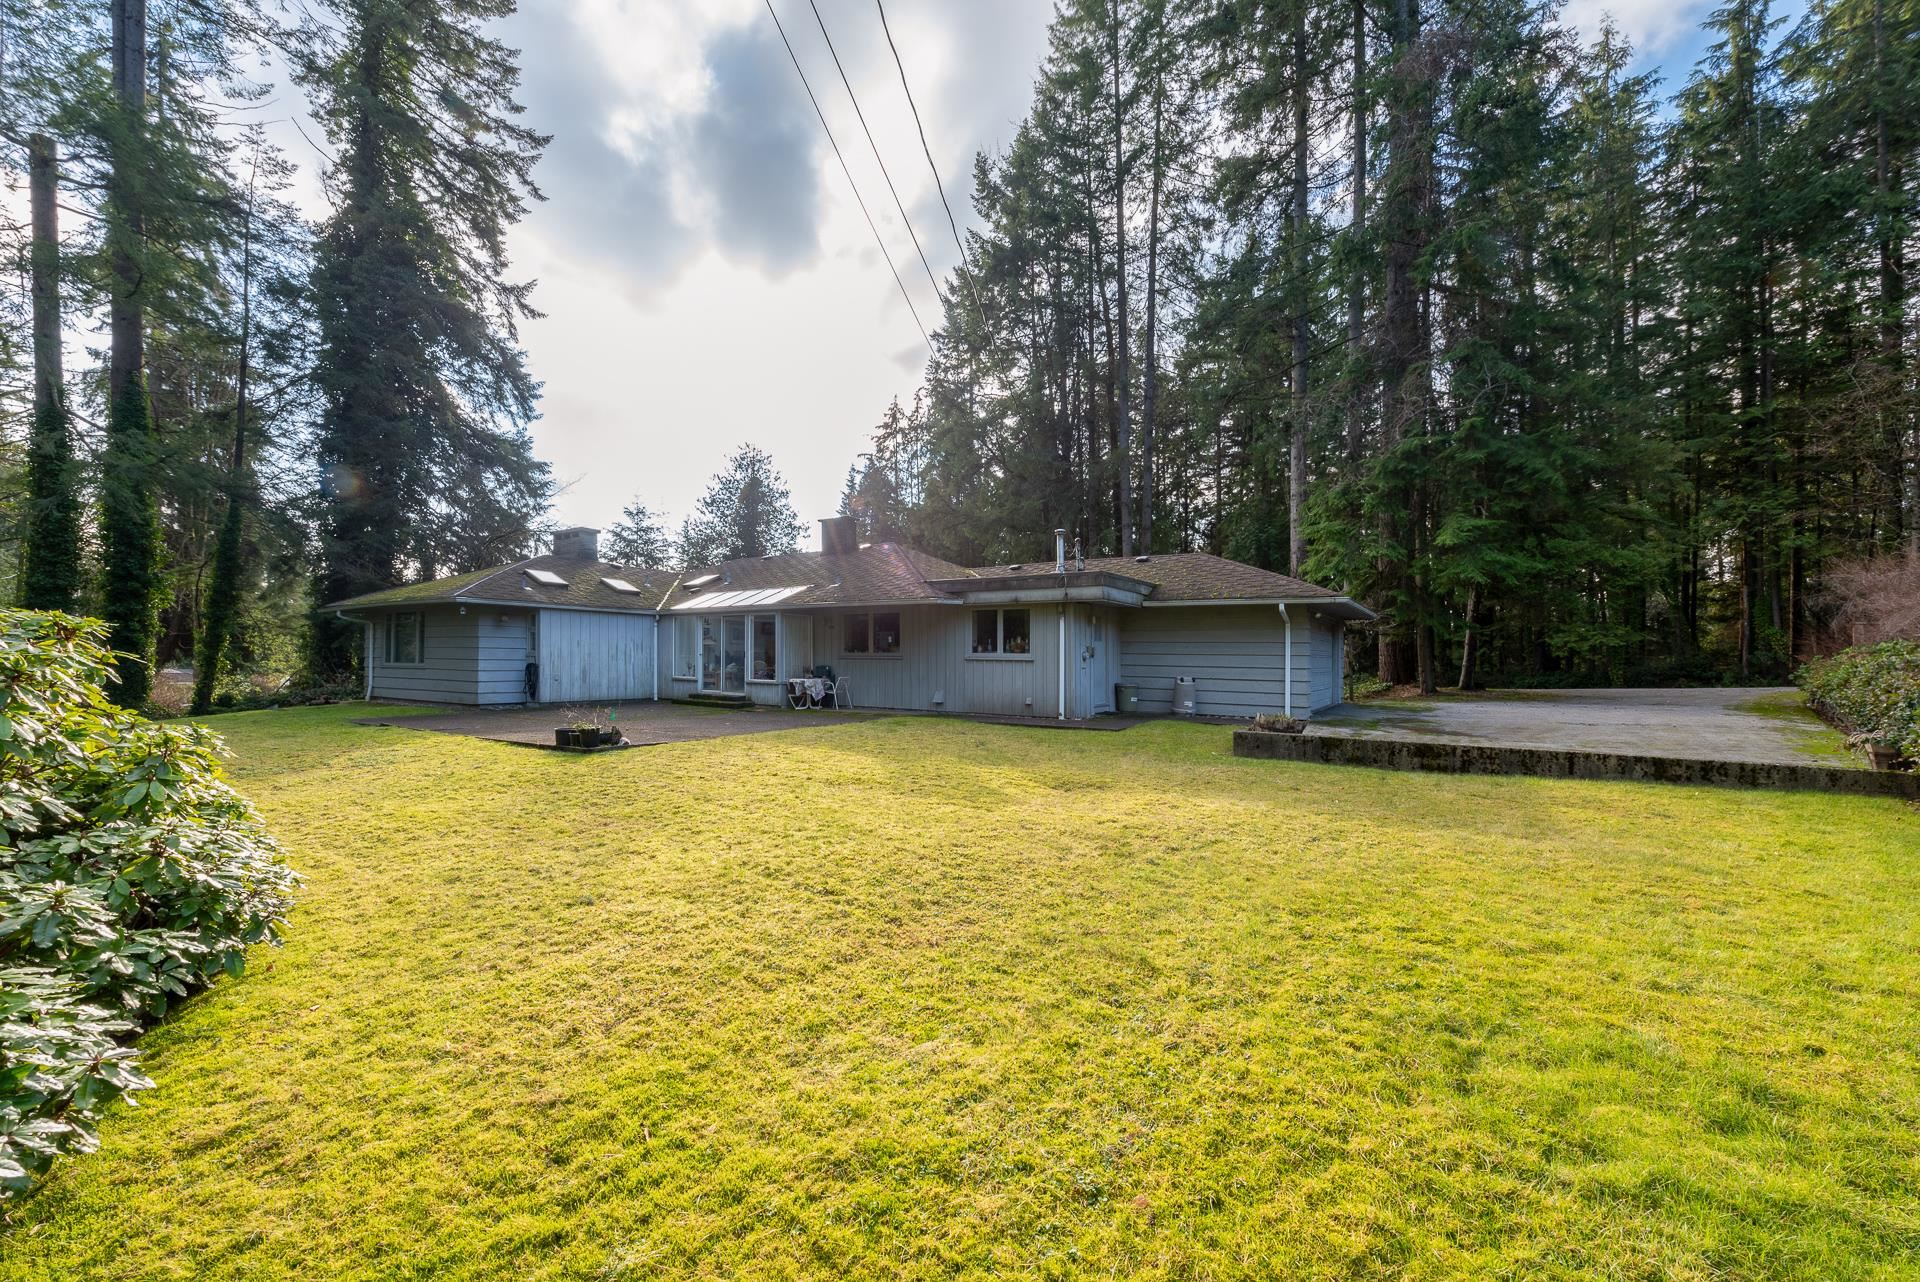 Listing image of 575 HADDEN DRIVE